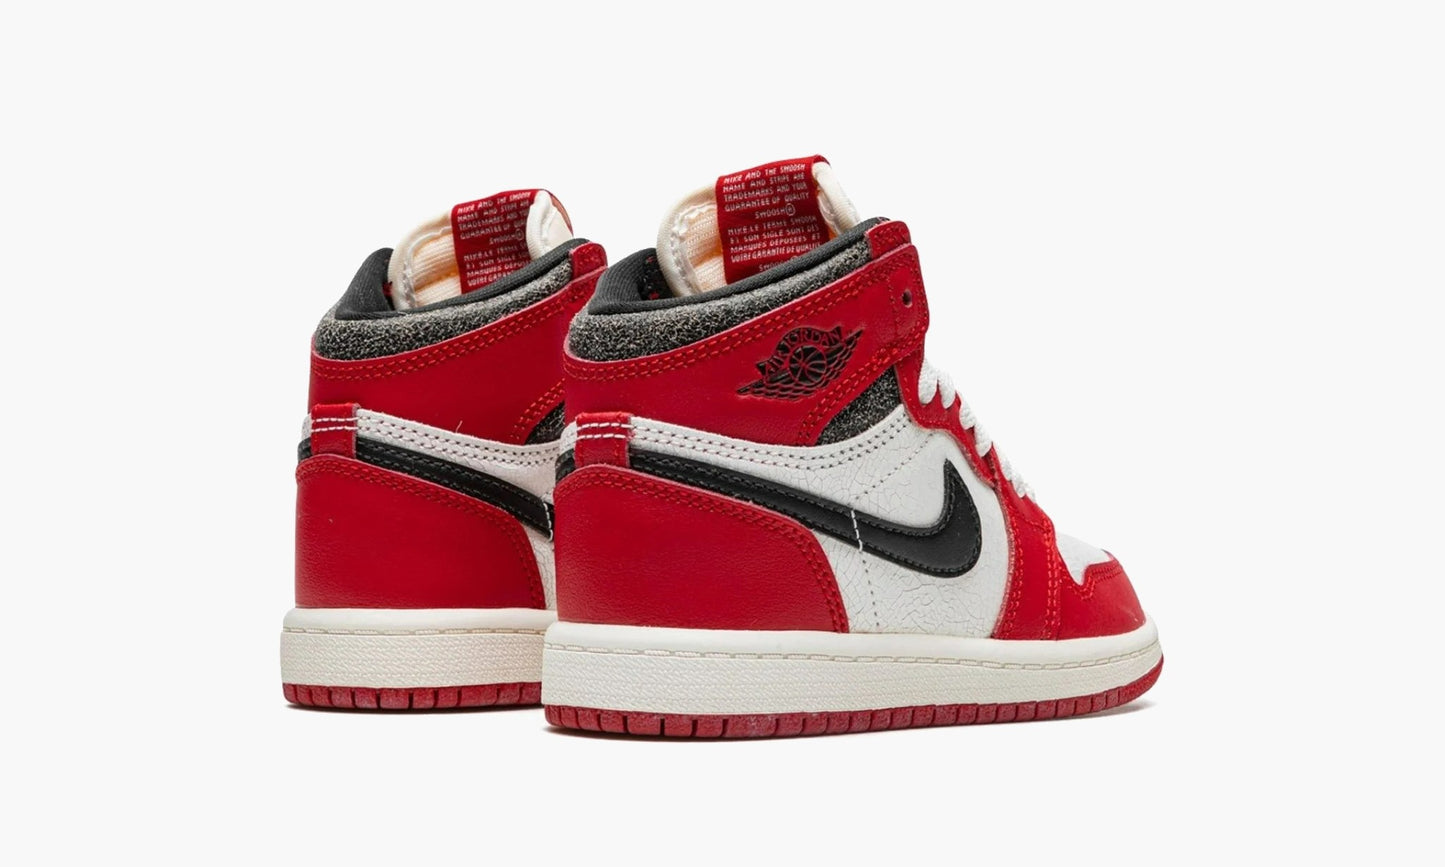 Air Jordan 1 Retro High OG PS Chicago Lost and Found - FD1412 612